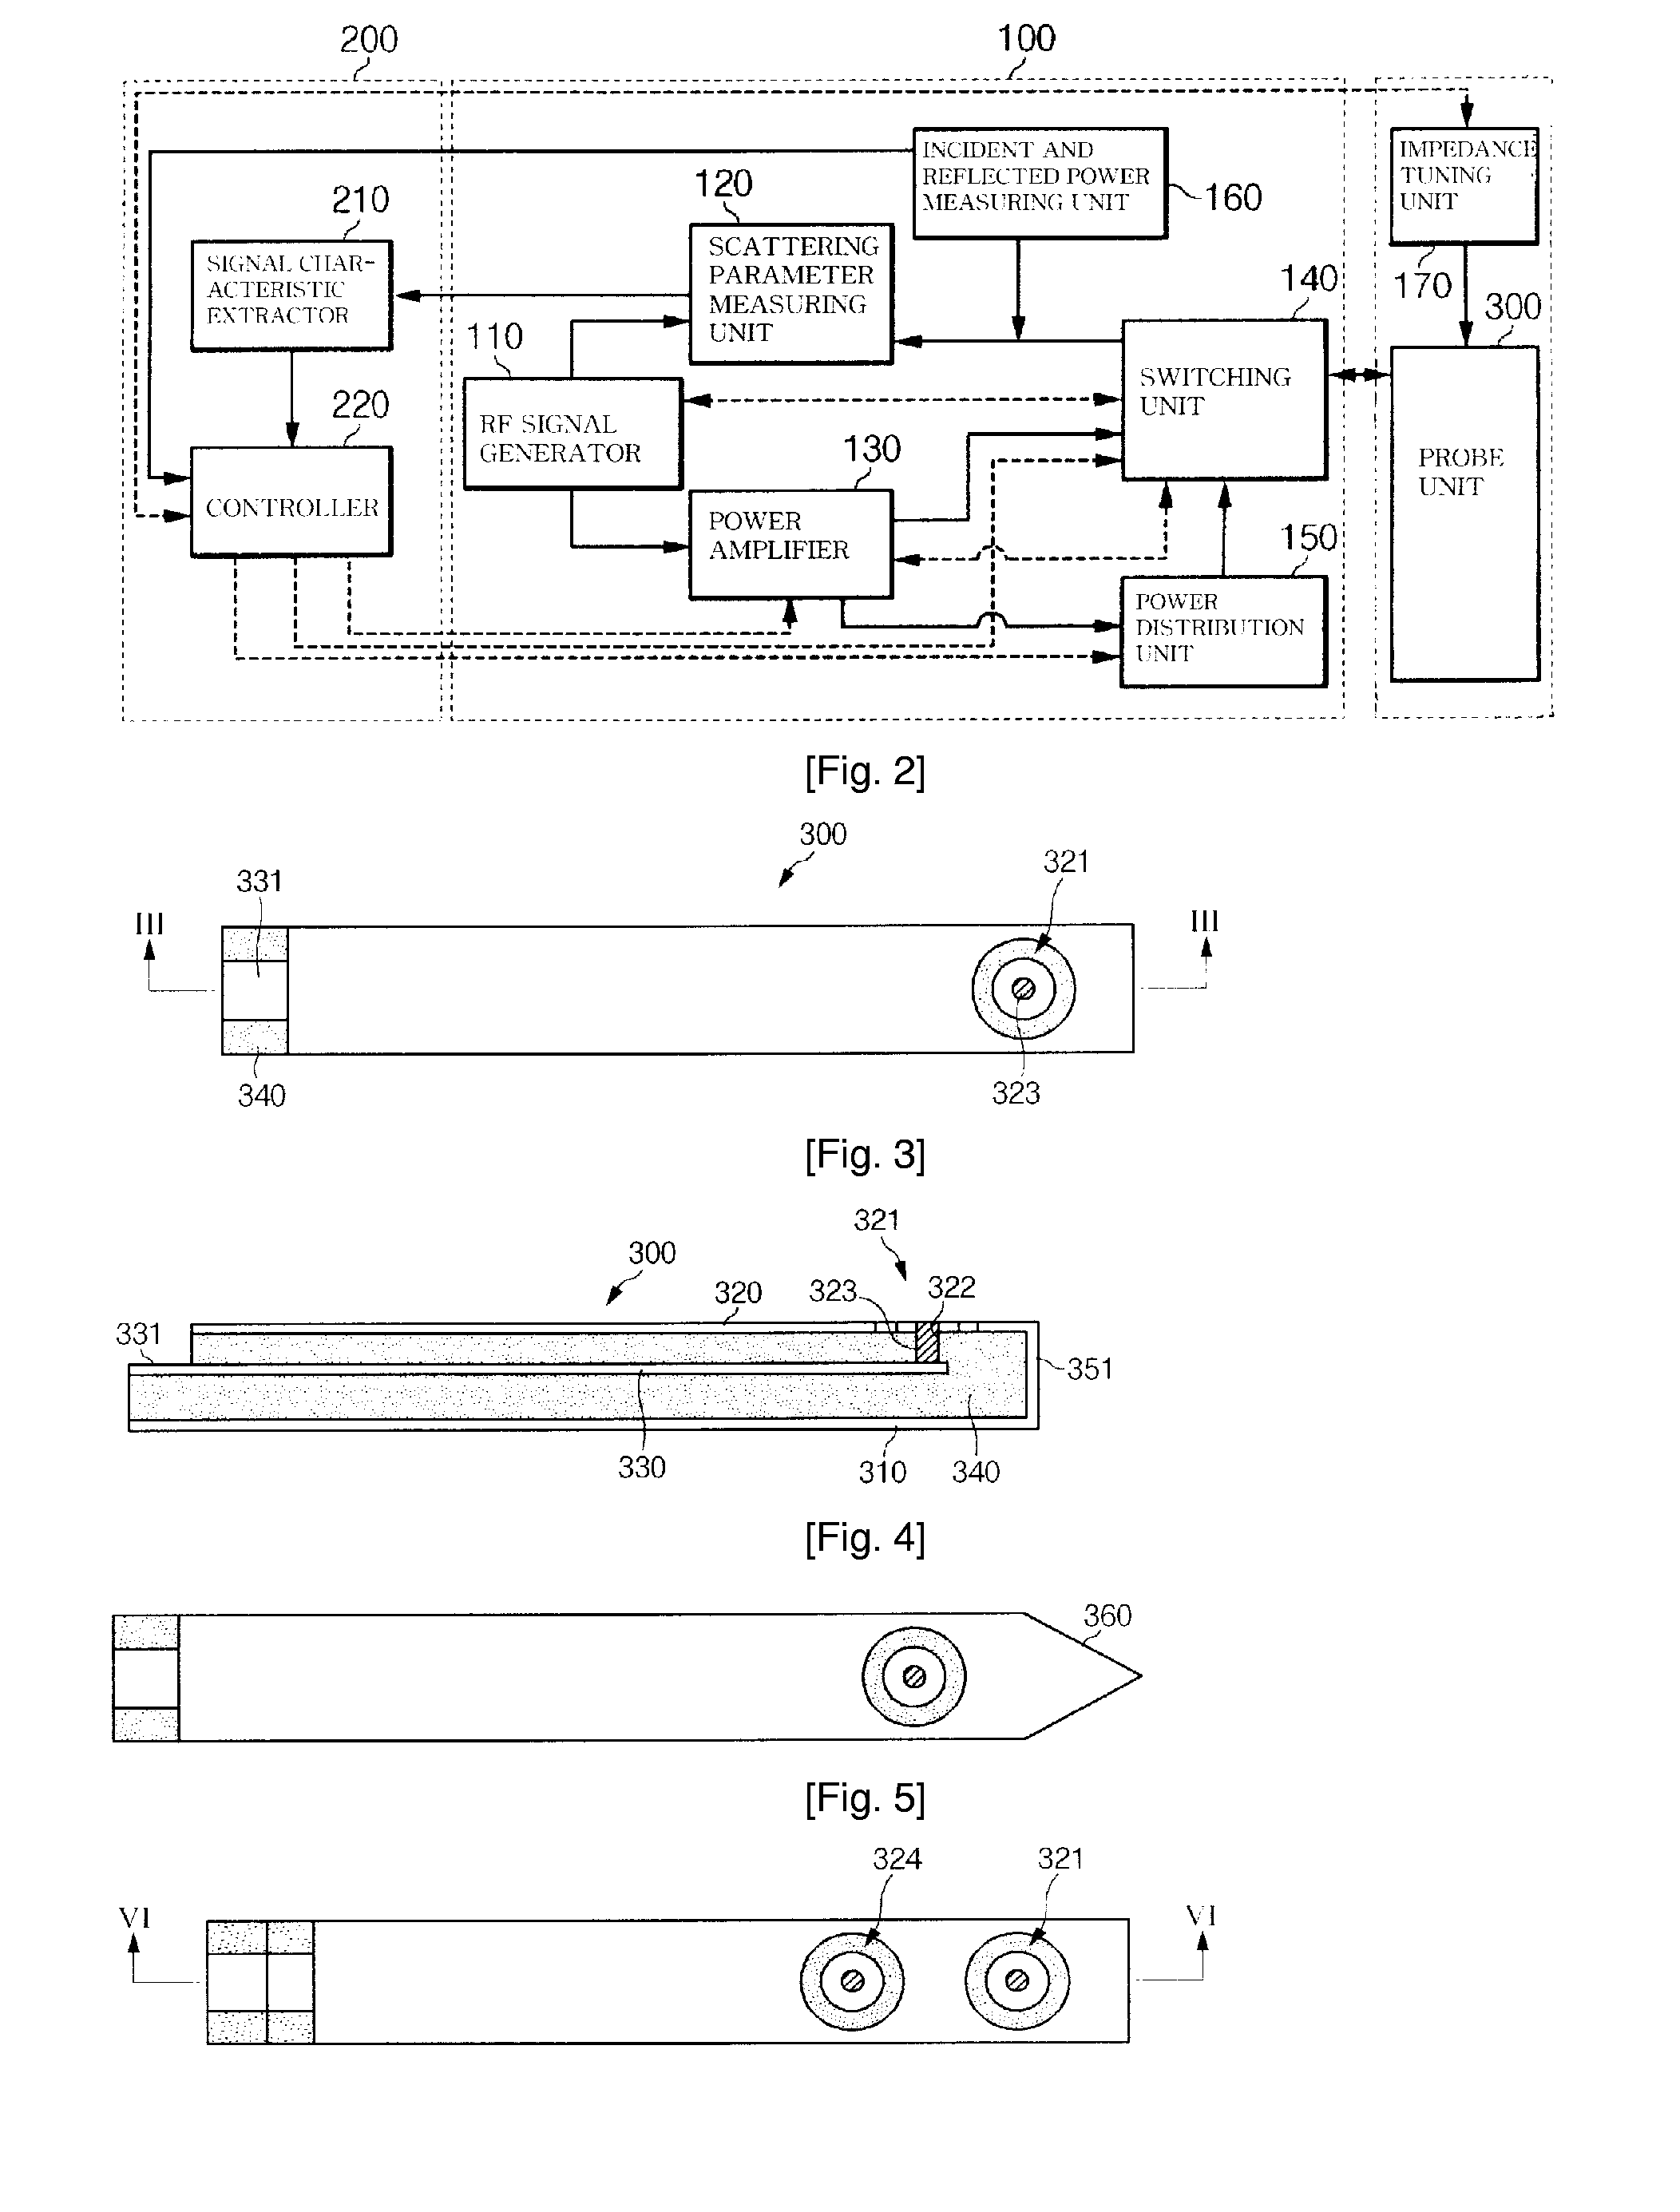 Cancer Detection and Treatment Instrument